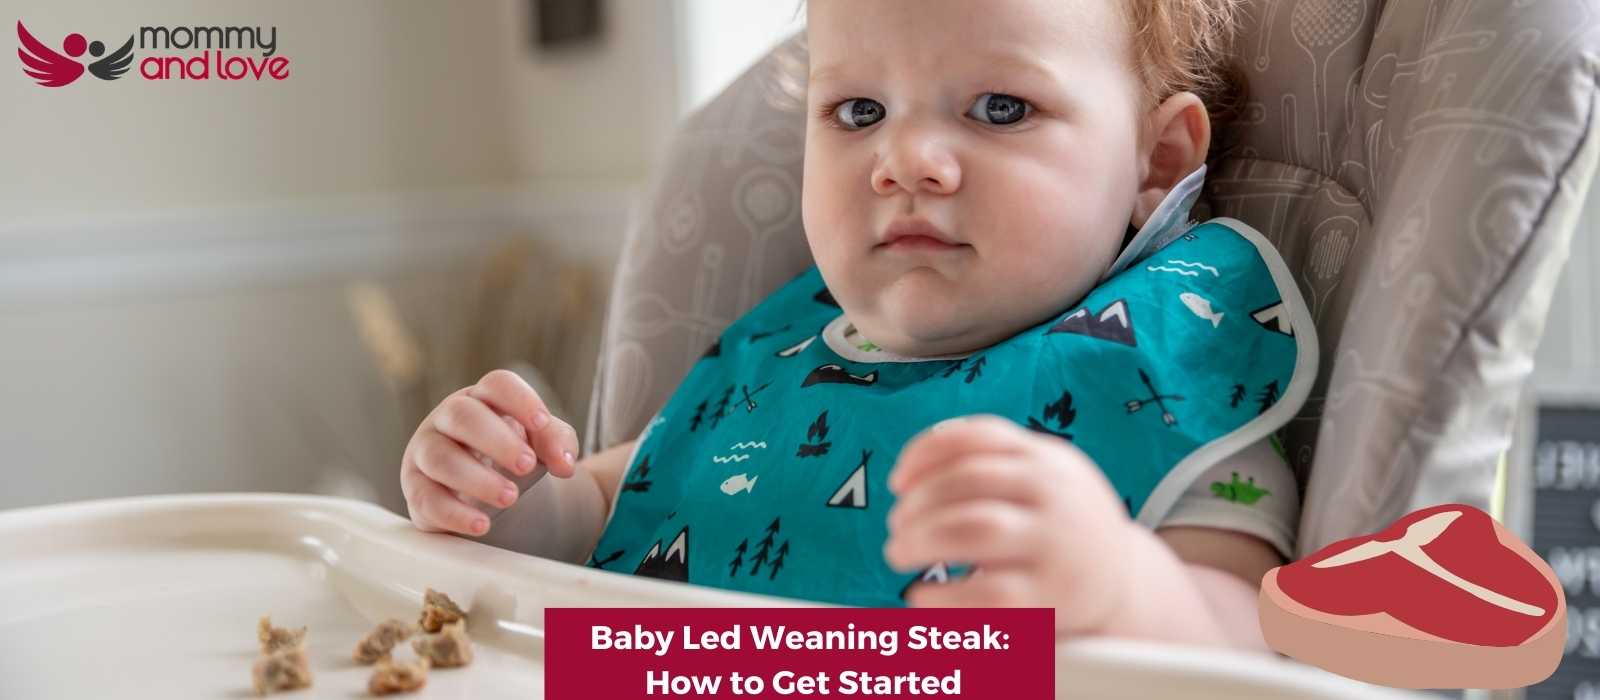 Baby Led Weaning Steak How to Get Started